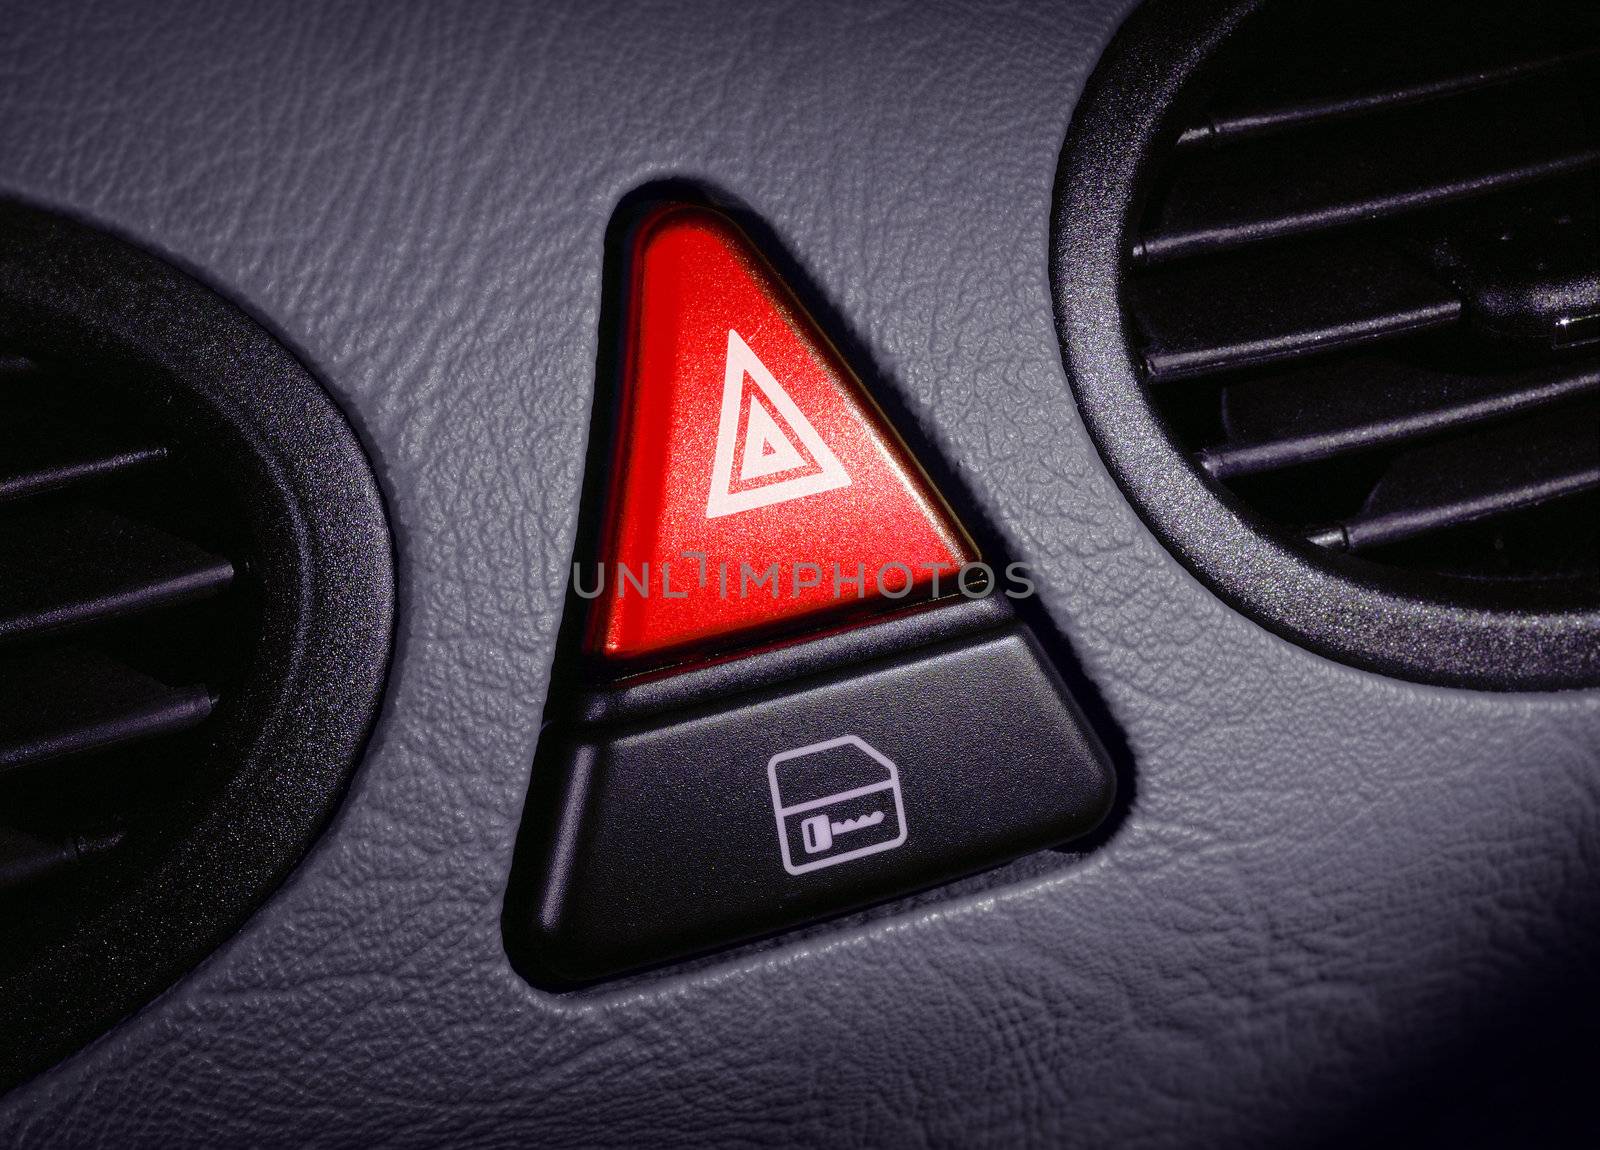 red emergency button on a dashboard of car